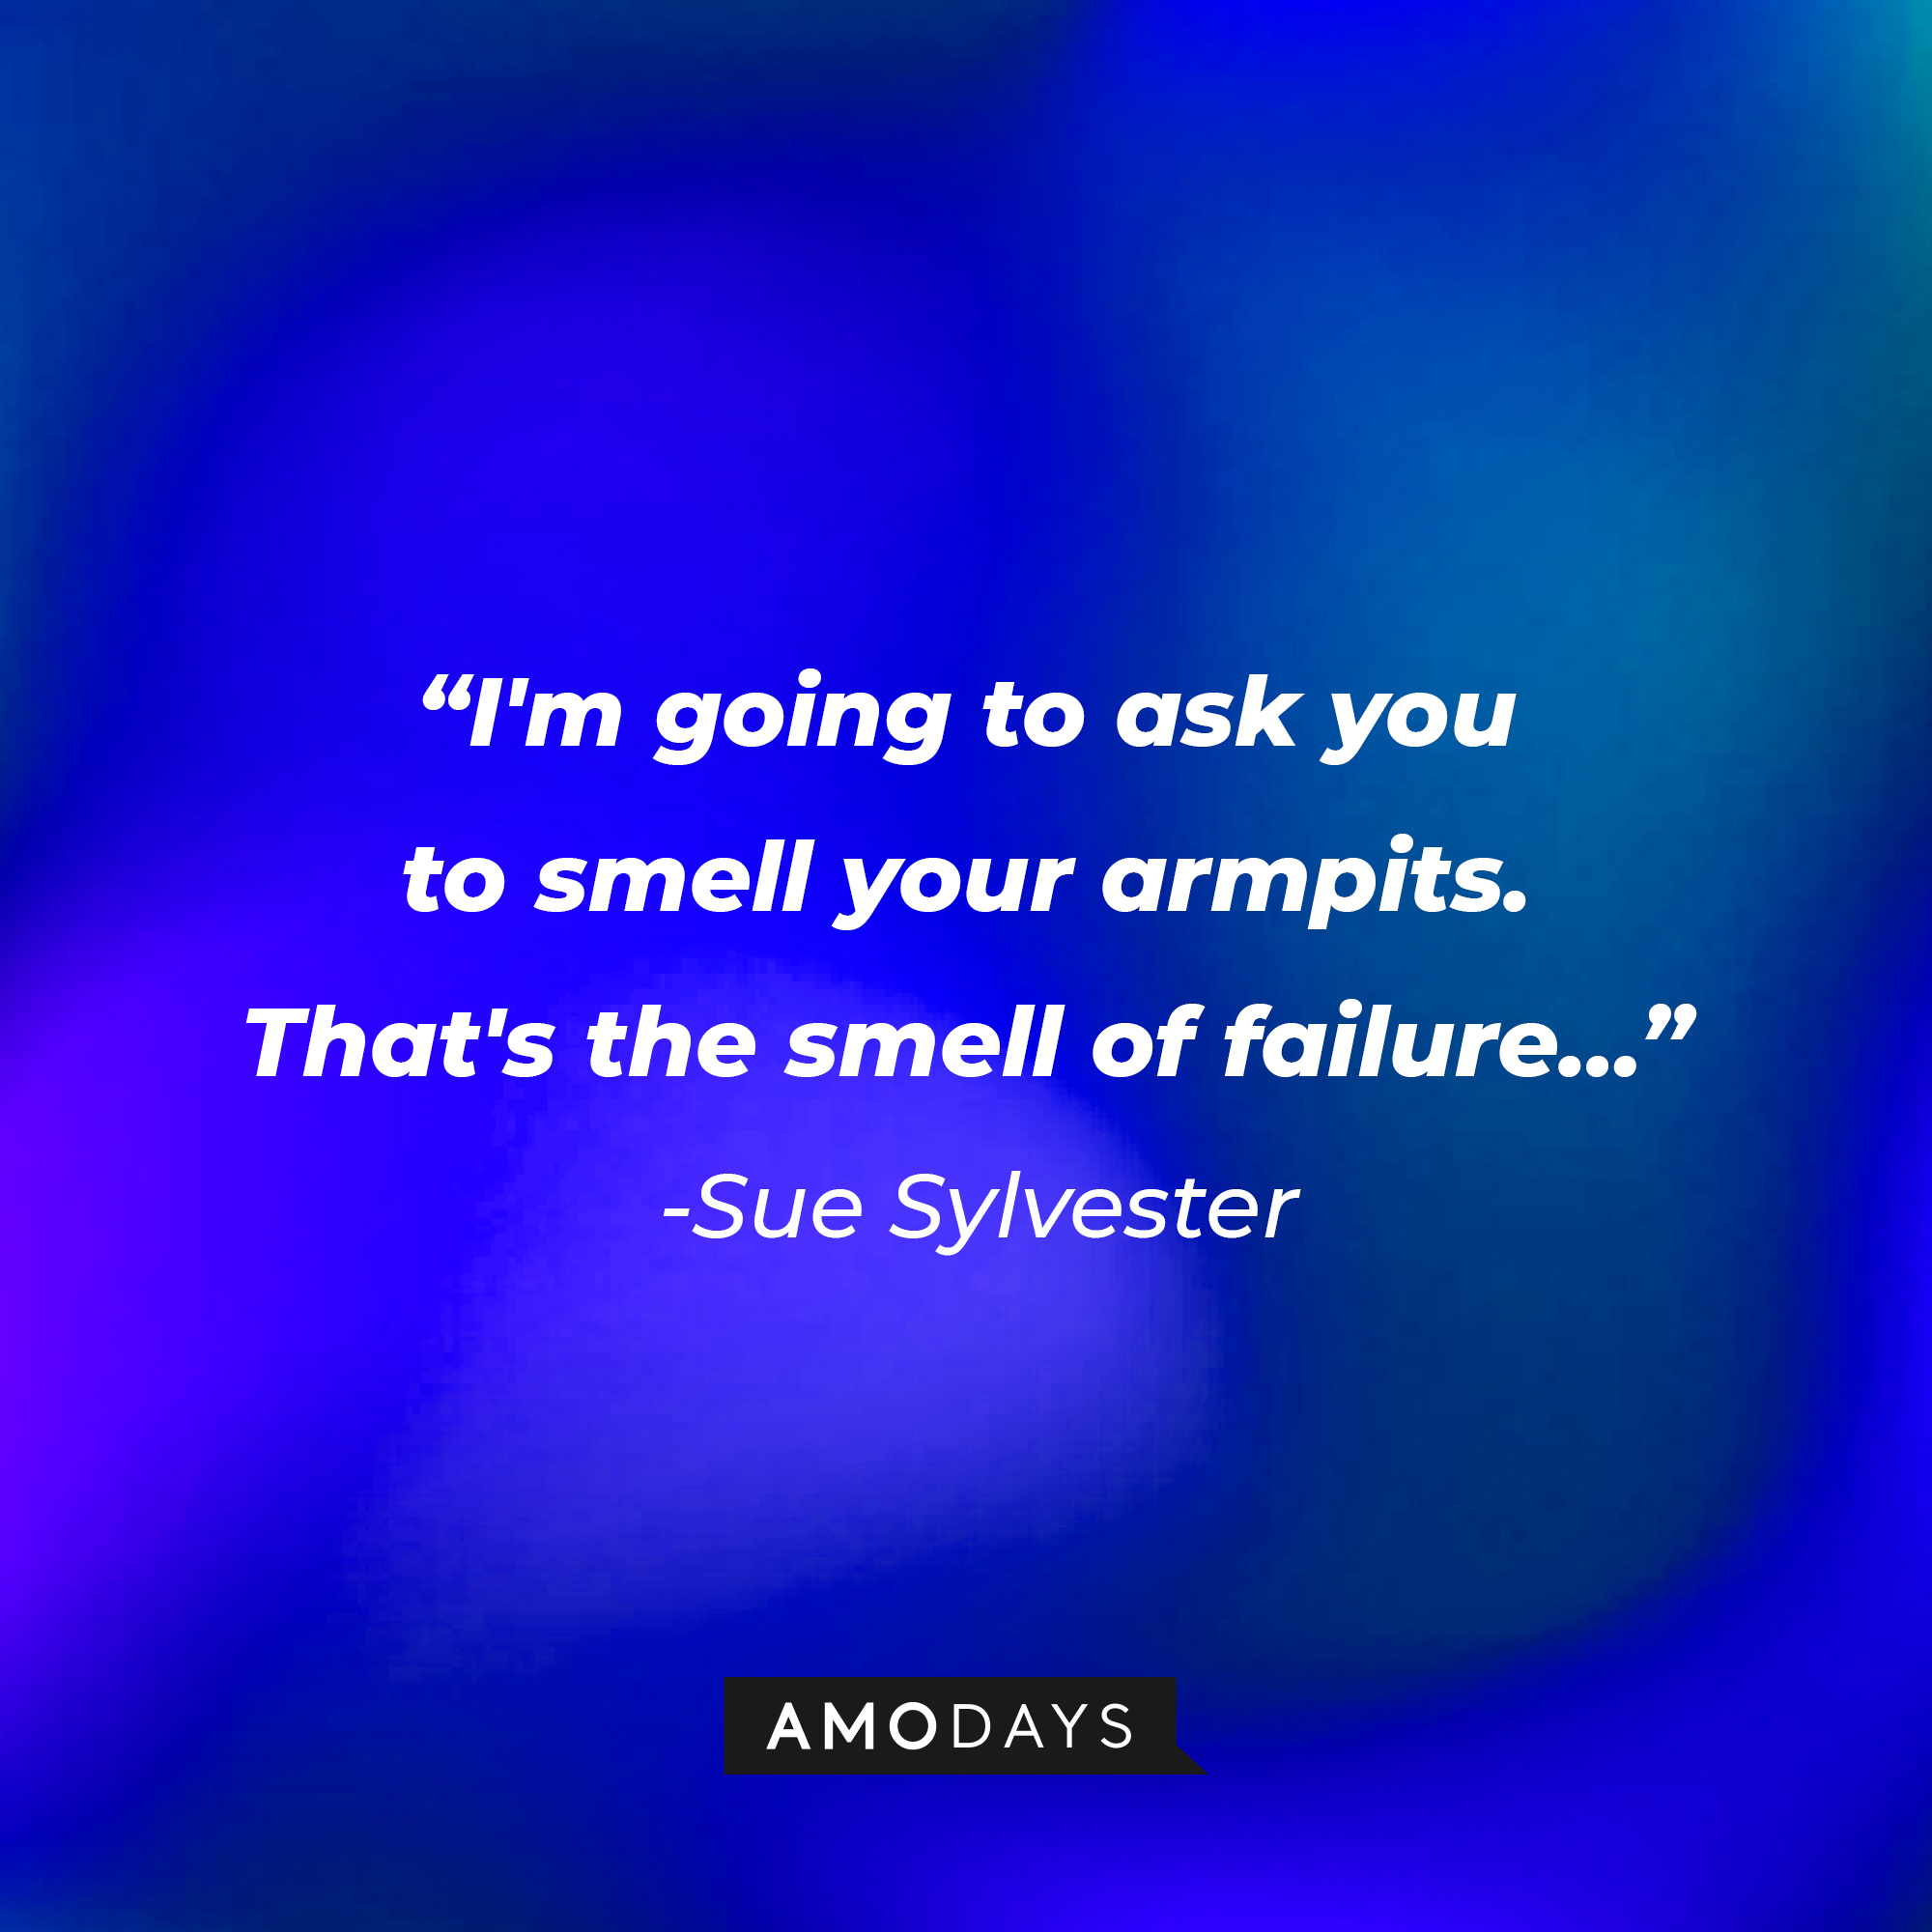 Sue Sylvester’s quote from “Glee”: “I'm going to ask you to smell your armpits. That's the smell of failure…” | Image: AmoDays